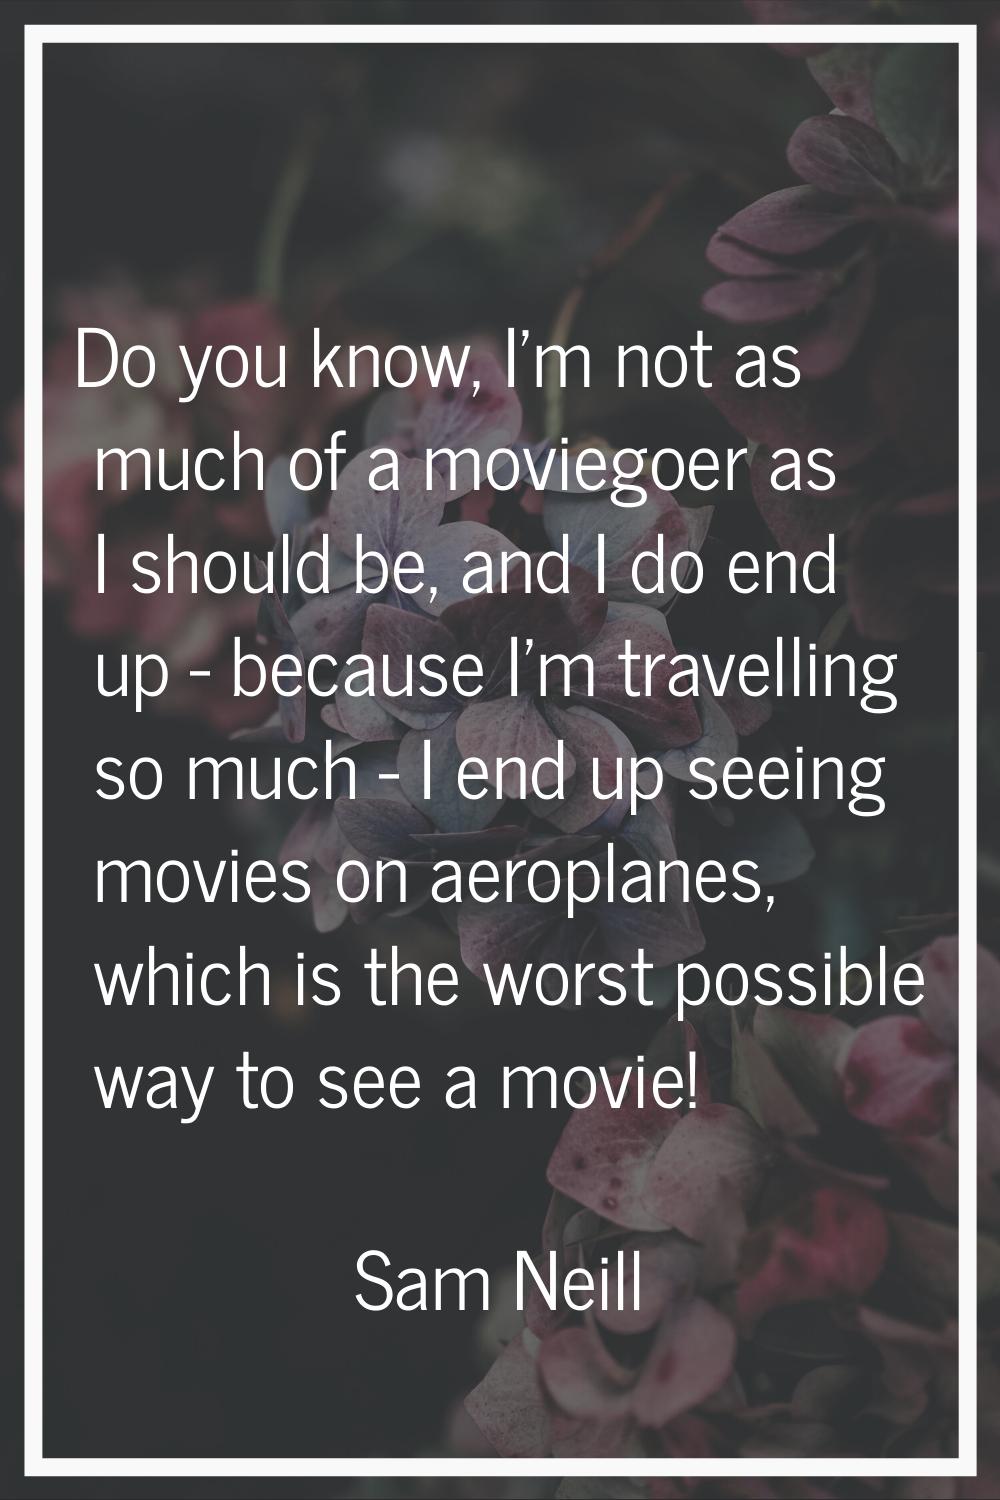 Do you know, I'm not as much of a moviegoer as I should be, and I do end up - because I'm travellin